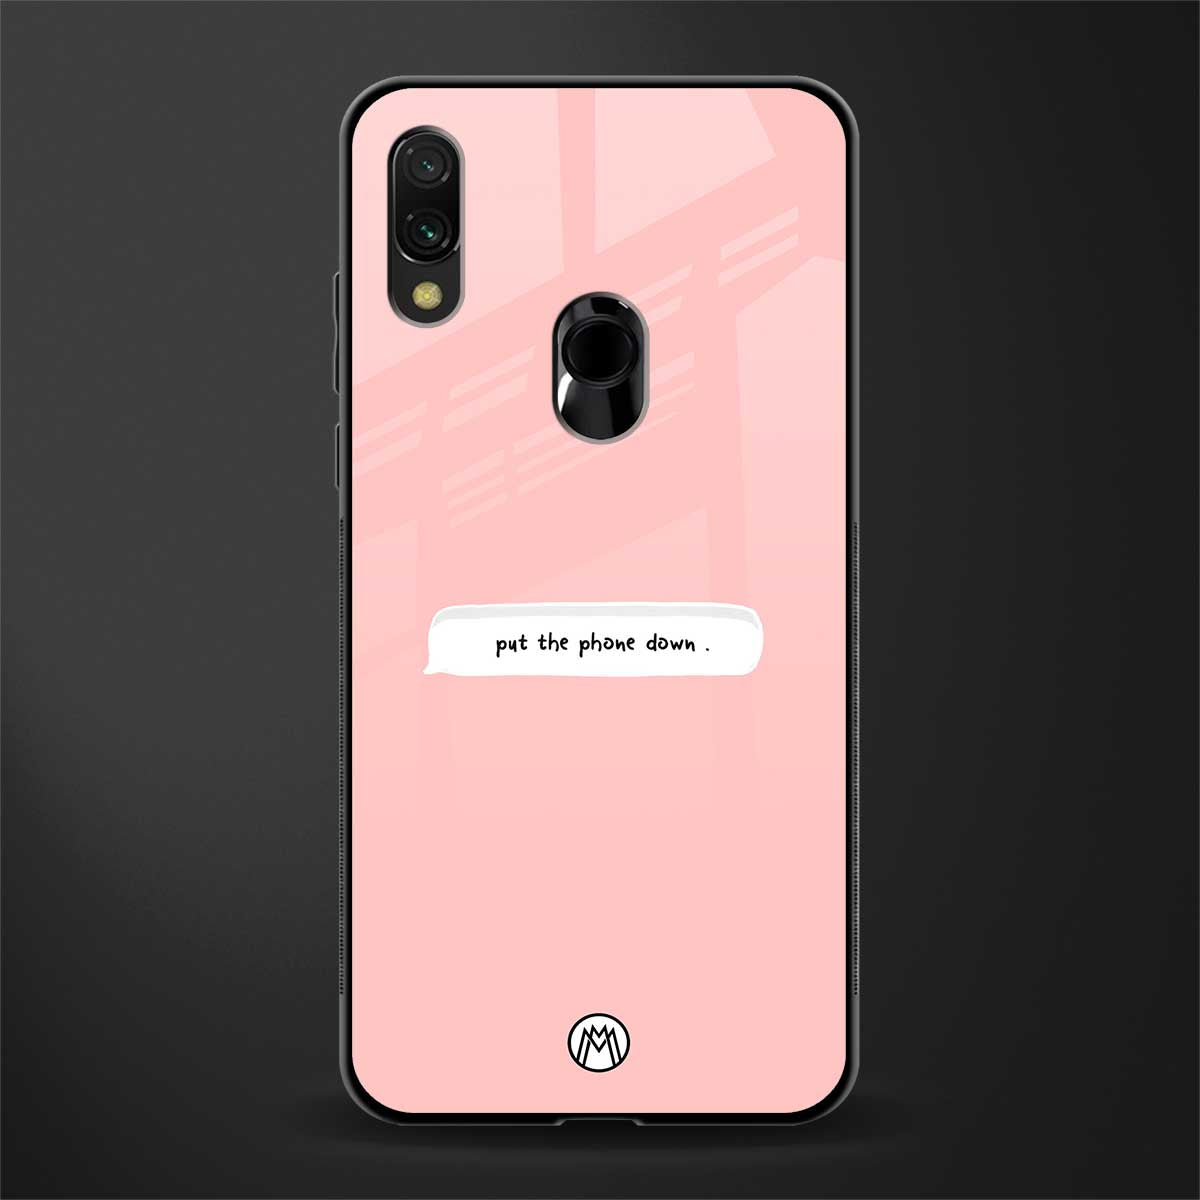 put the phone down glass case for redmi note 7 pro image